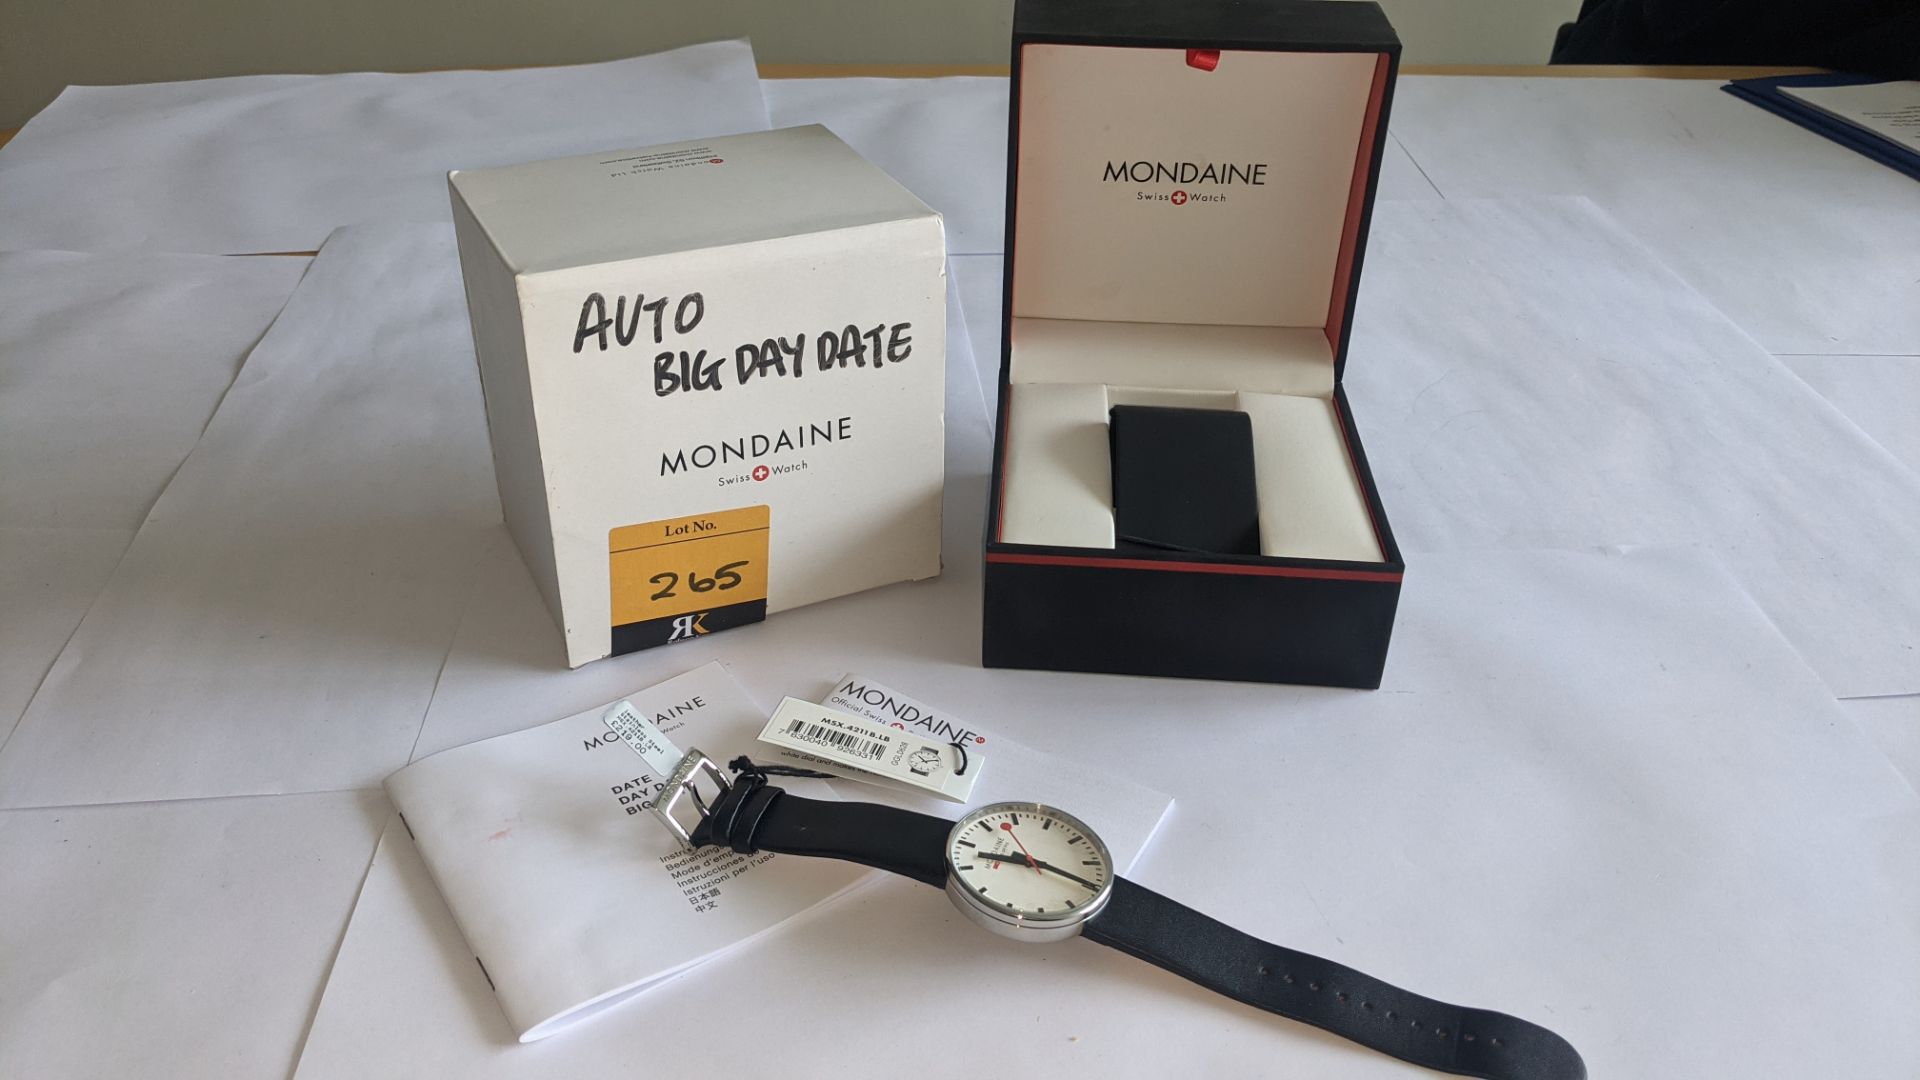 Mondaine watch, product code MSX.4211B.LB. RRP £219. Stainless steel case, water resistant. This lo